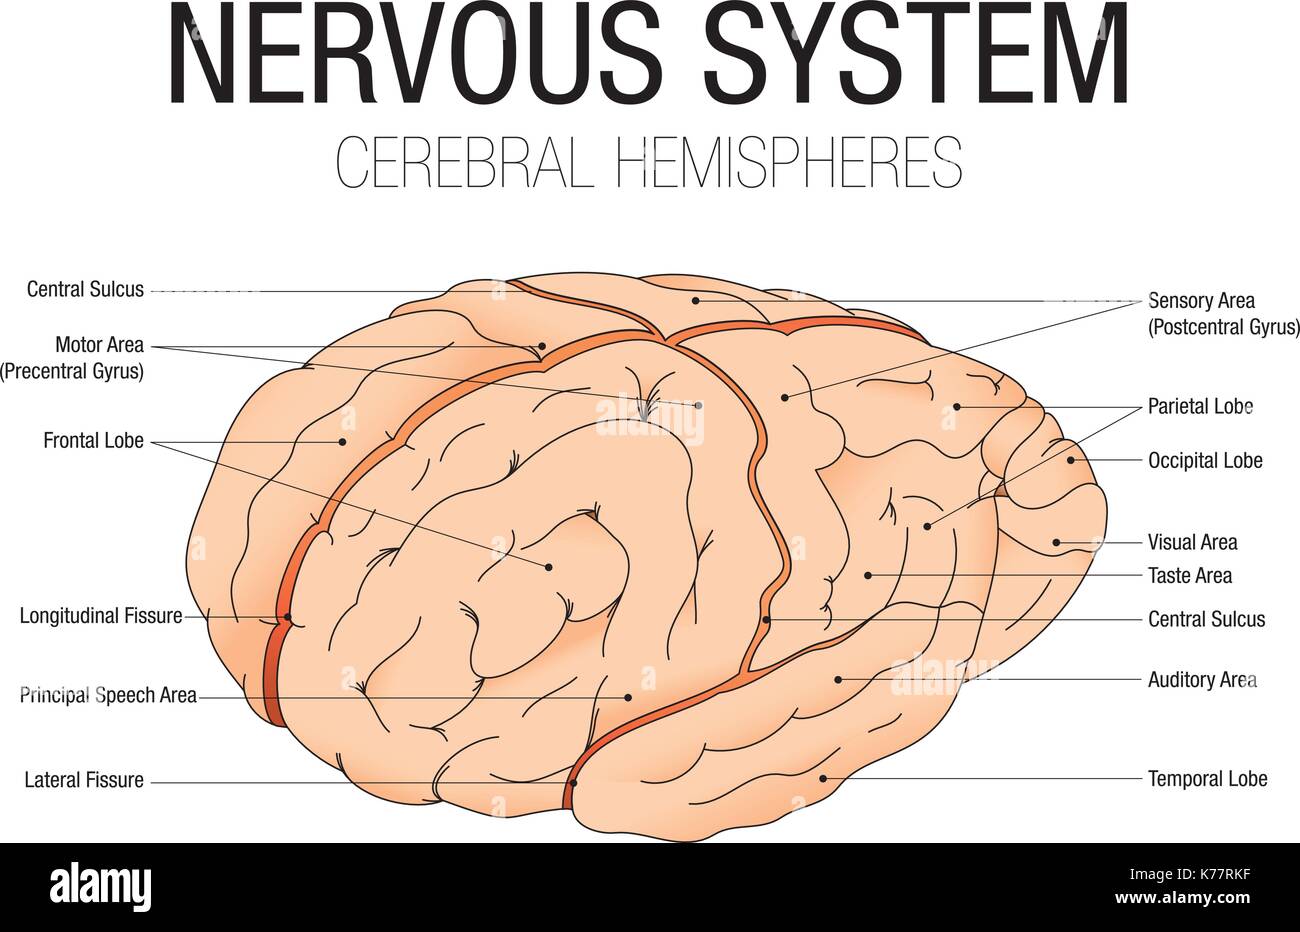 NERVOUS SYSTEM - CEREBRAL HEMISPHERES with parts name - Vector image Stock Vector